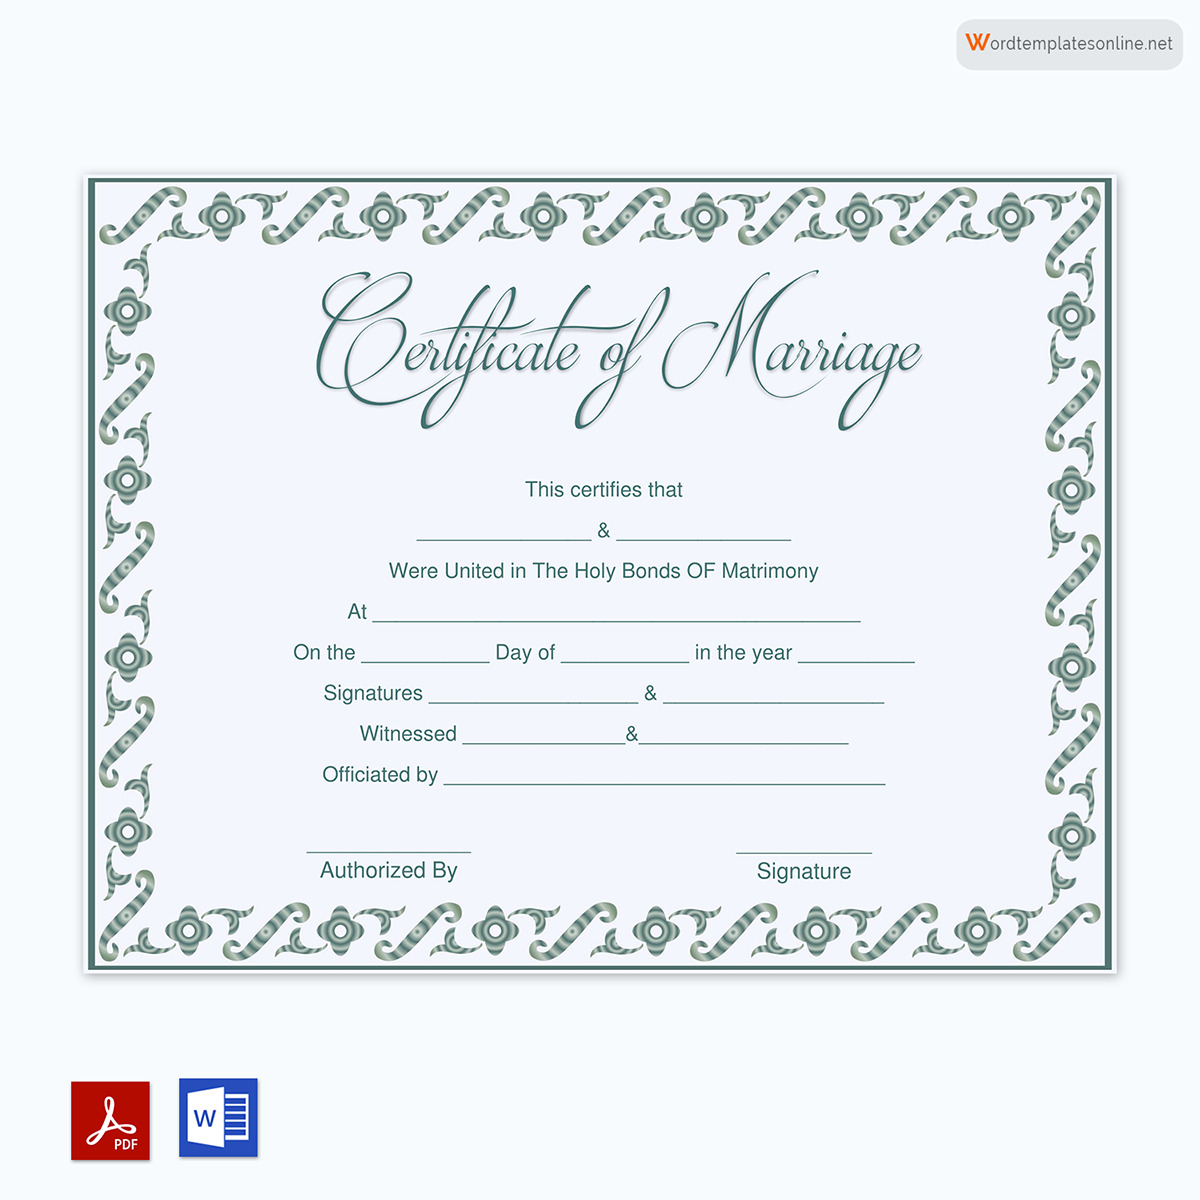 Marriage Certificate doc format